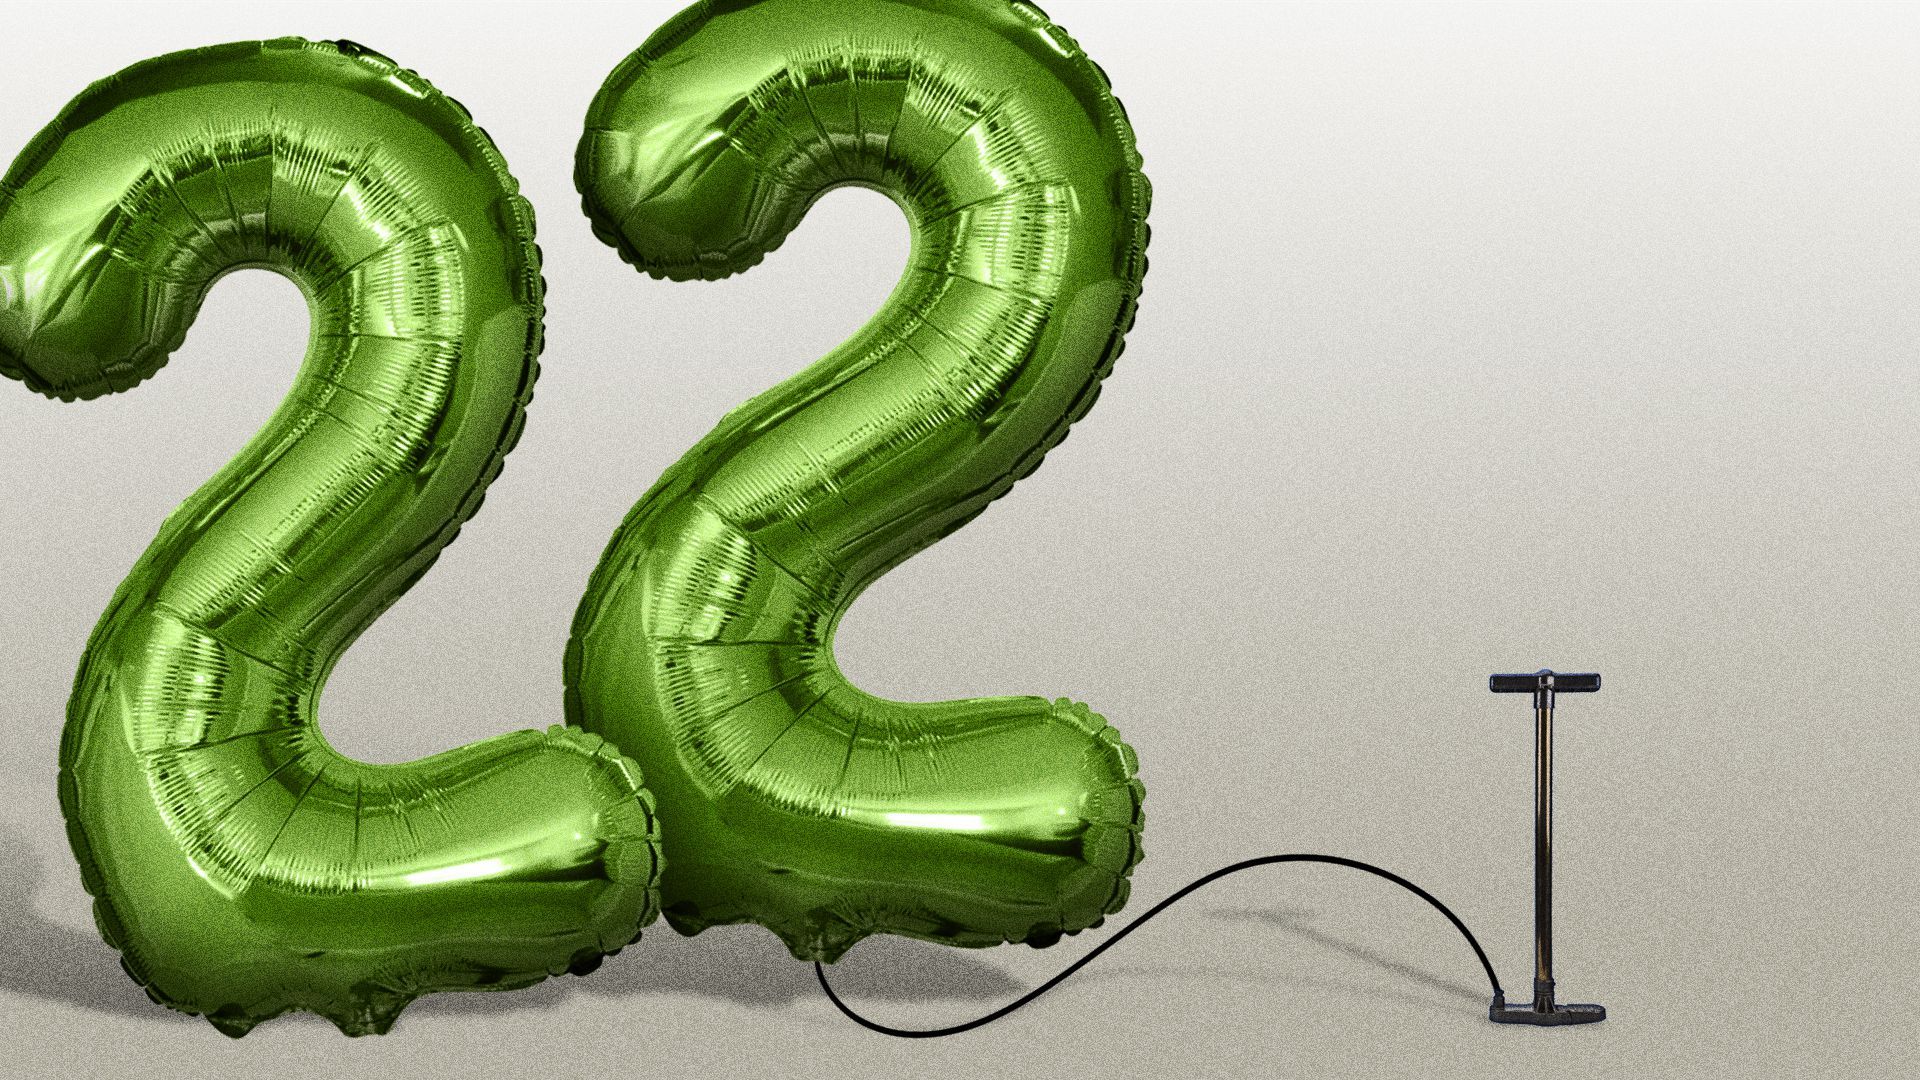 Illustration of a small pump inflating large balloons that say "22."